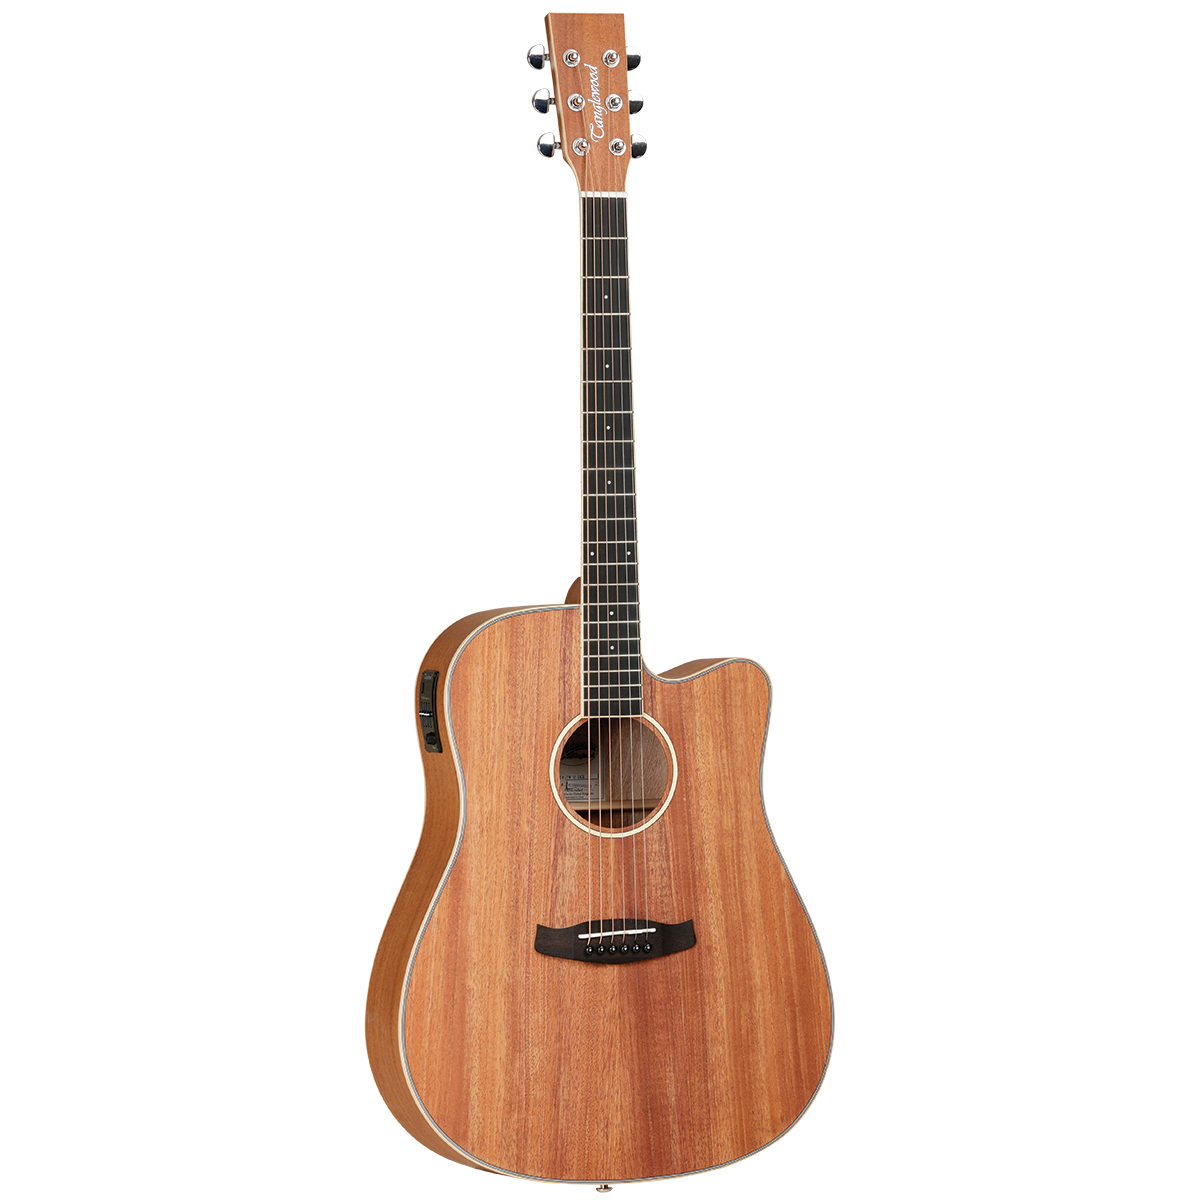 Tanglewood Union Dreadnought Acoustic Guitar